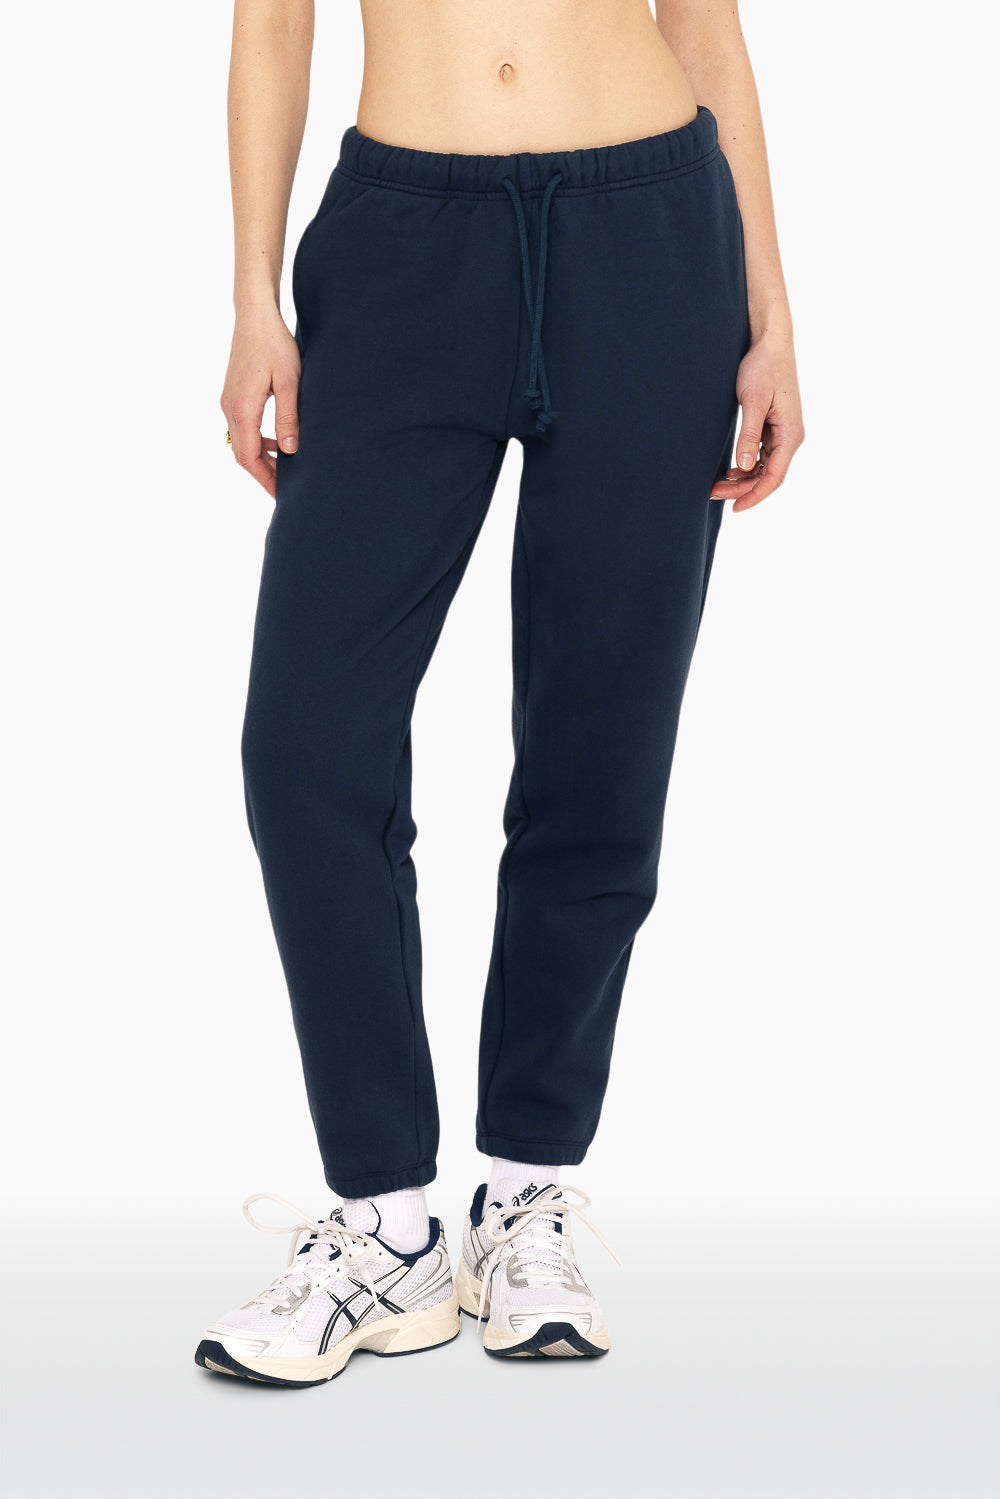 SET™ EMBROIDERED HEAVYWEIGHT SWEATS DRAWSTRING SWEATPANTS IN OXFORD